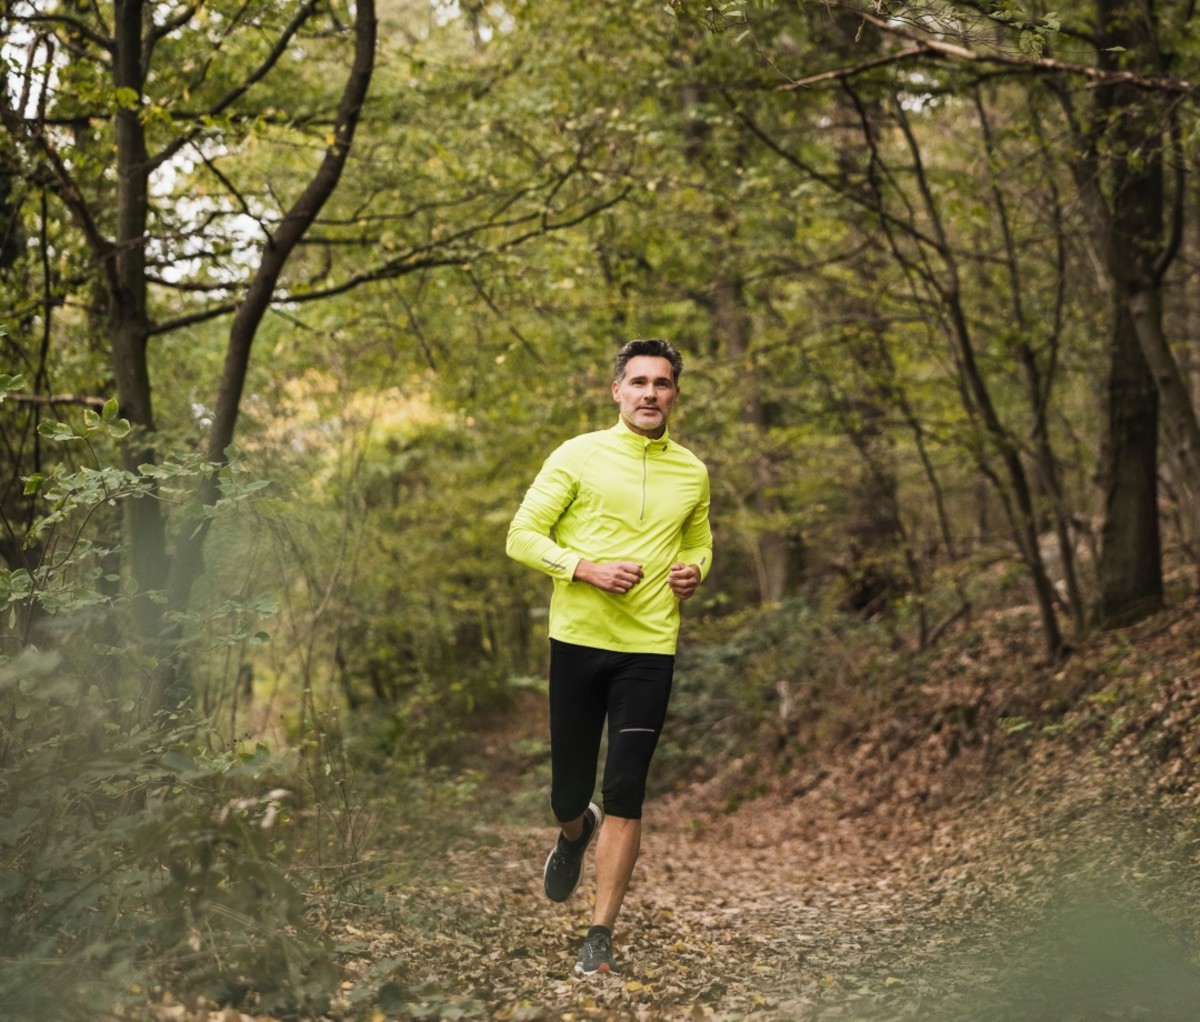 How trail running can transform your body - Men's Journal